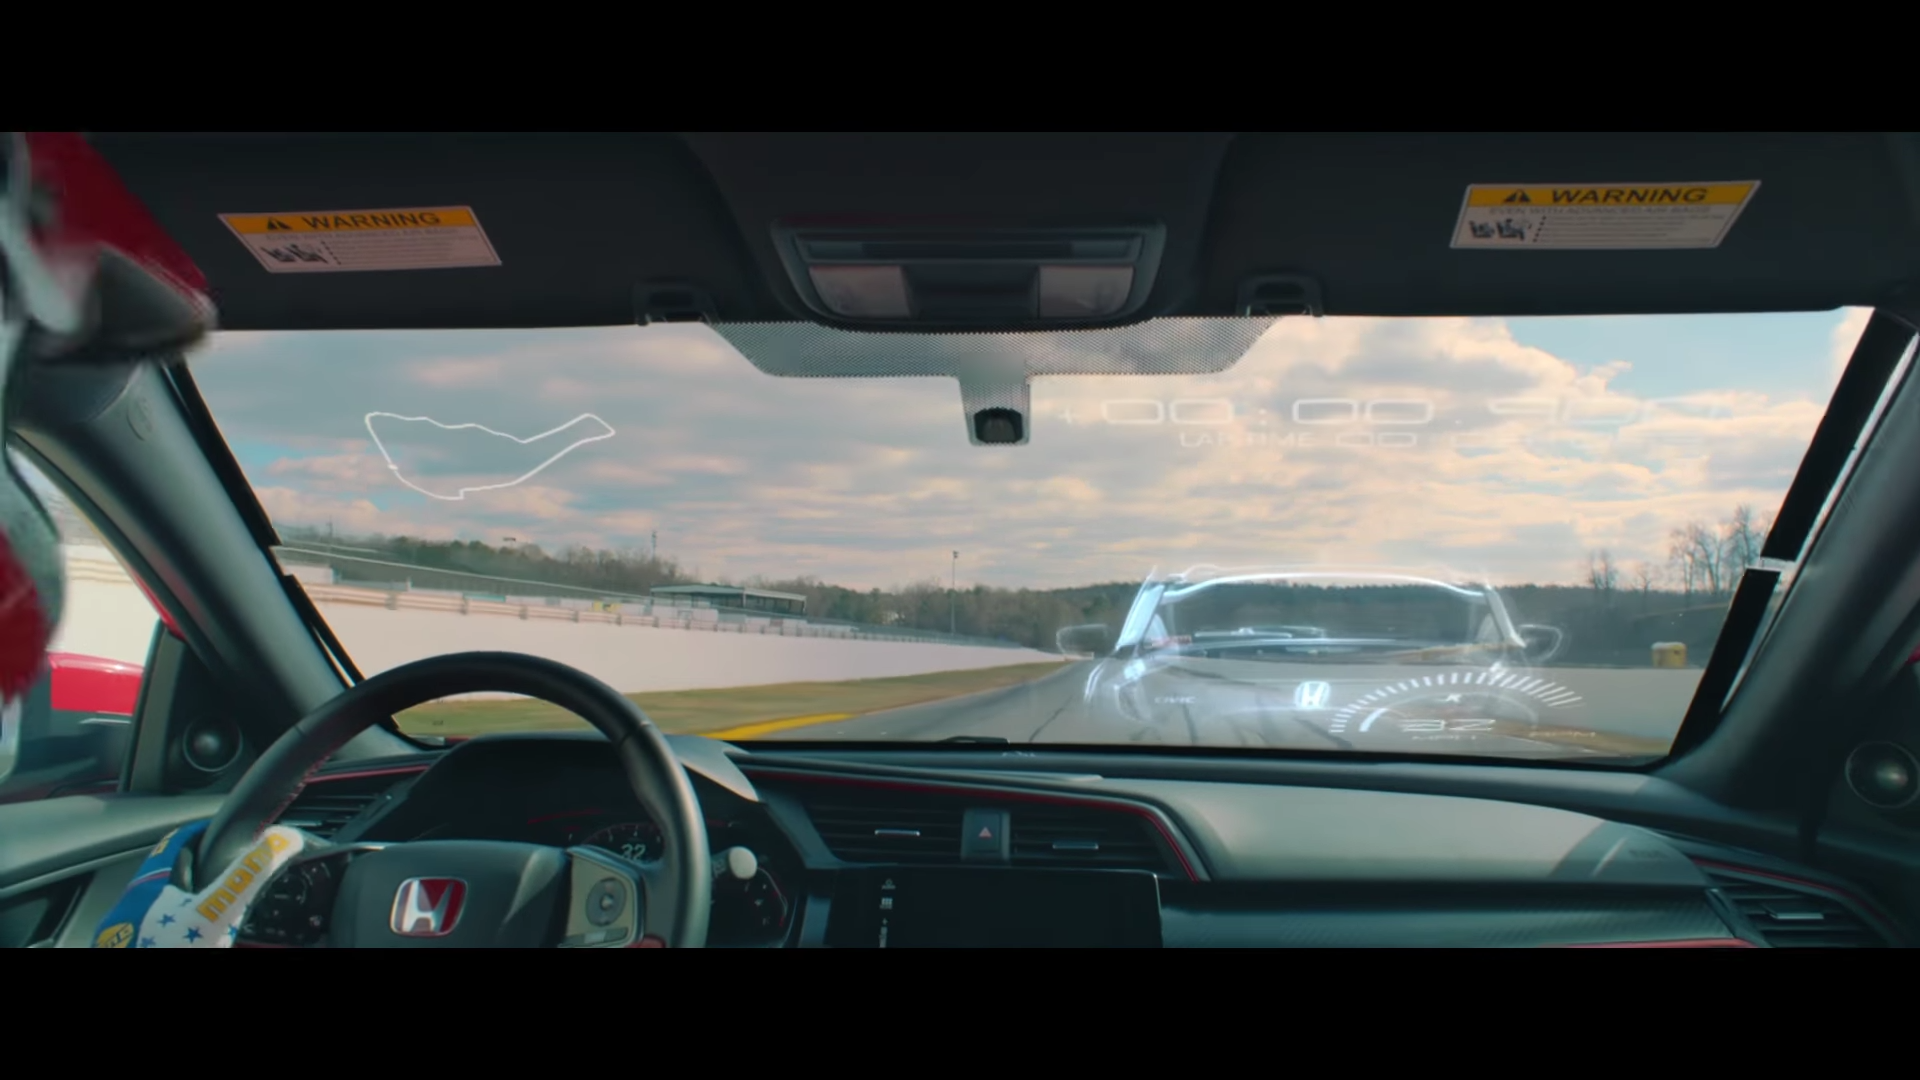 Honda Civic Type R mixed reality race shows a virtual car on the windshield of the real car.